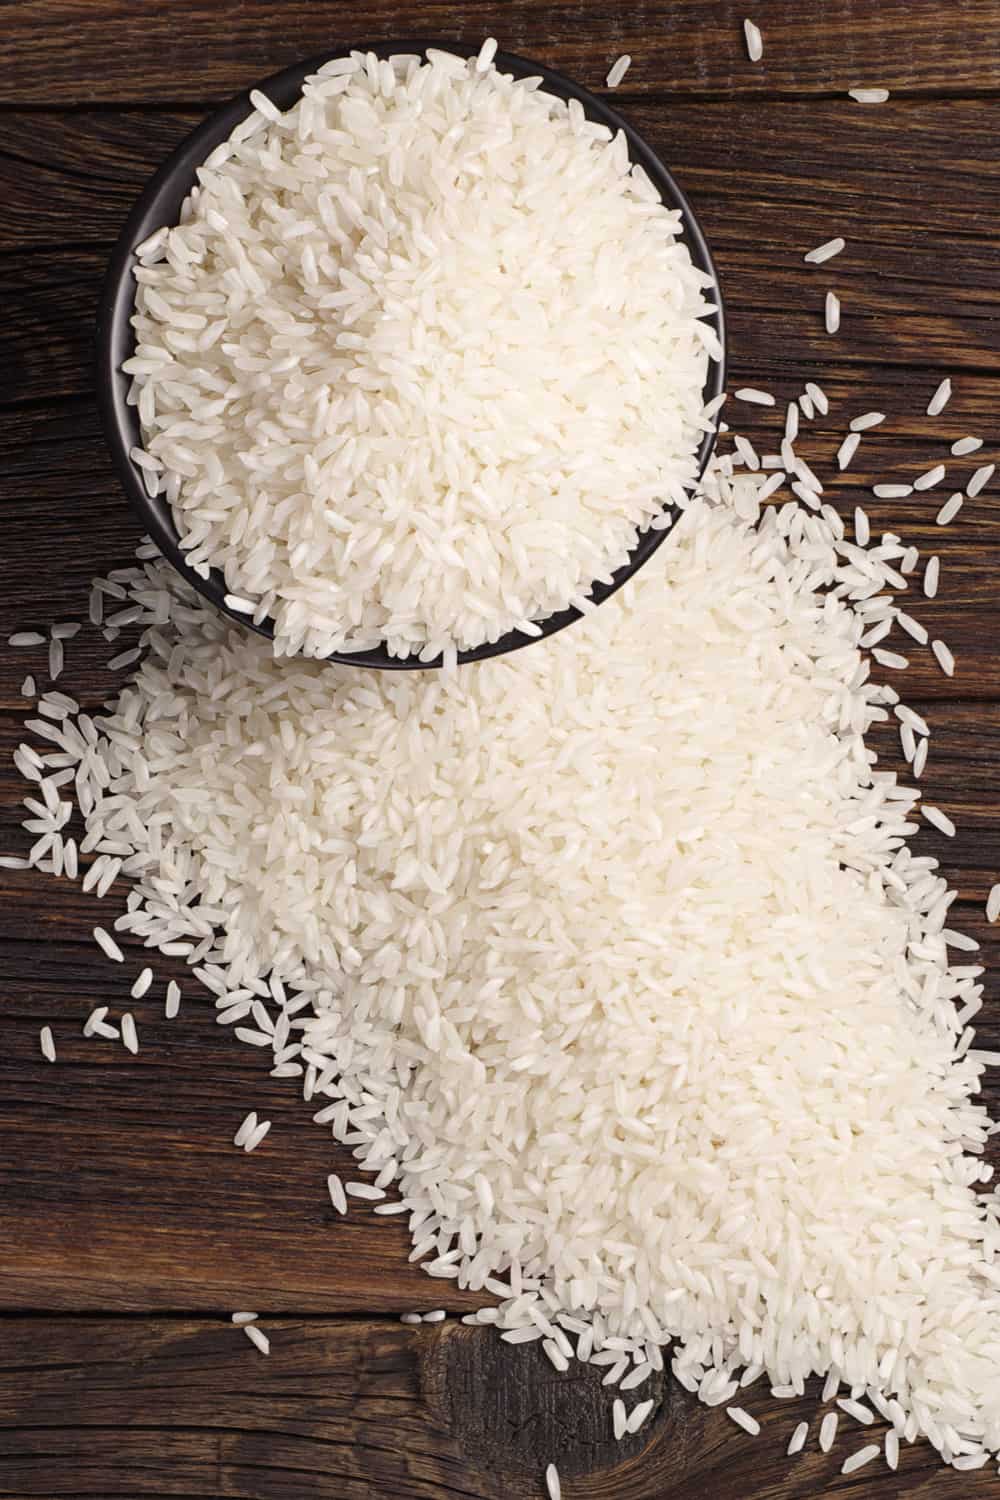 Does Rice Go Bad